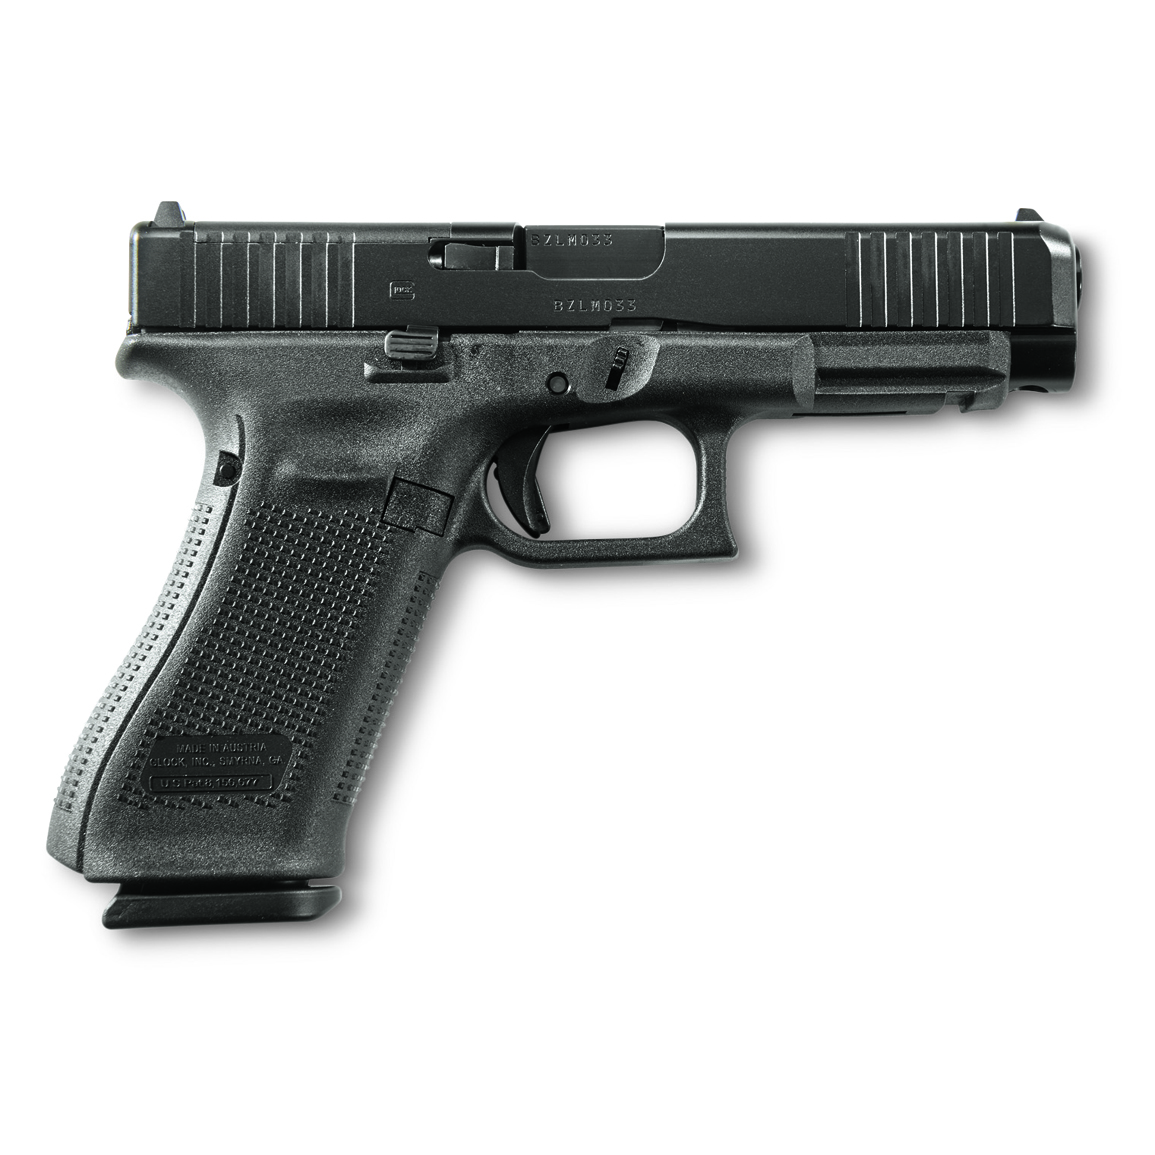 Glock 47 MOS, Semi-automatic, 9mm, 4.49 Barrel, 17+1 Rounds - 732986,  Semi-Automatic at Sportsman's Guide